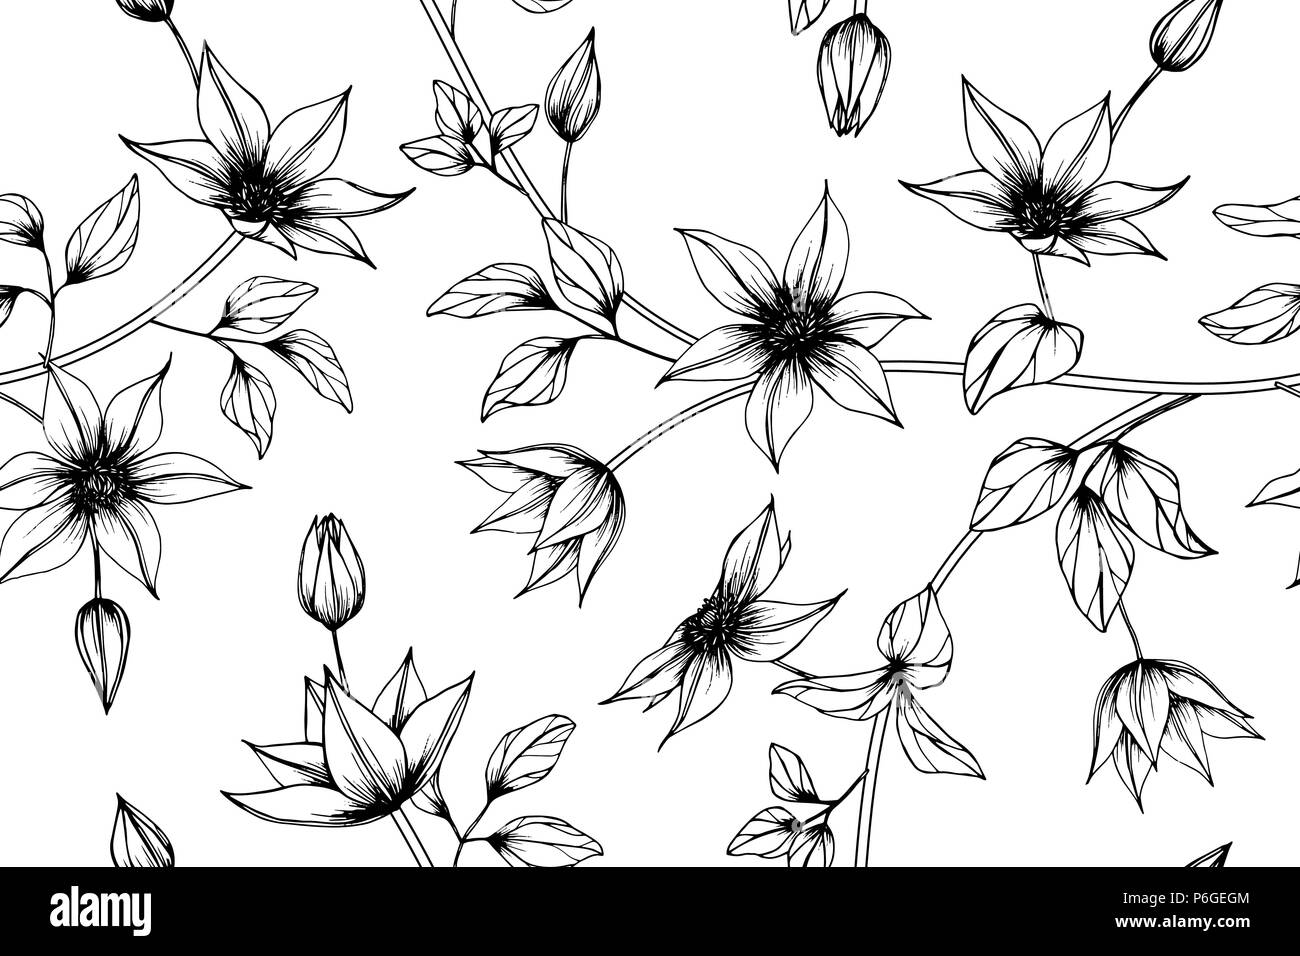 Seamless Clematis flower pattern background. Black and white with drawing line art illustration. Stock Vector